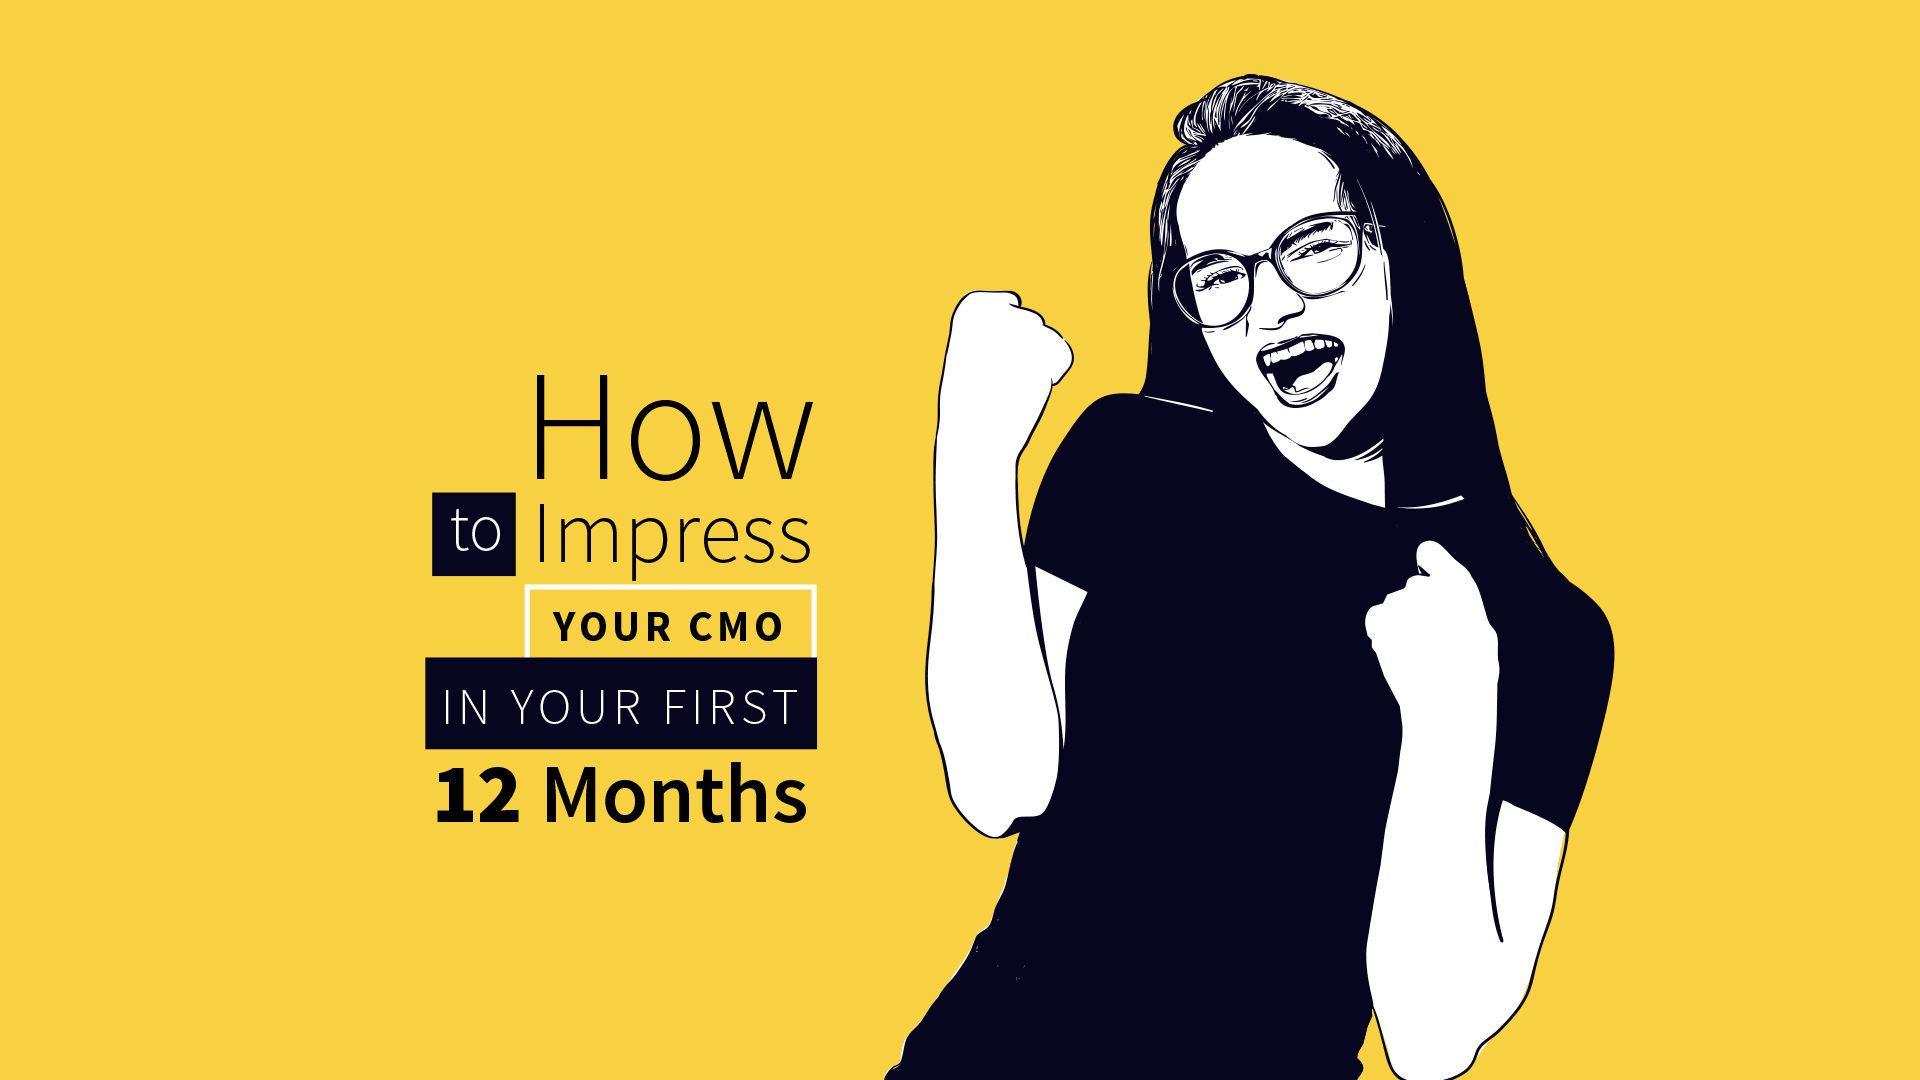 How to Impress Your CMO in the First 12 Months